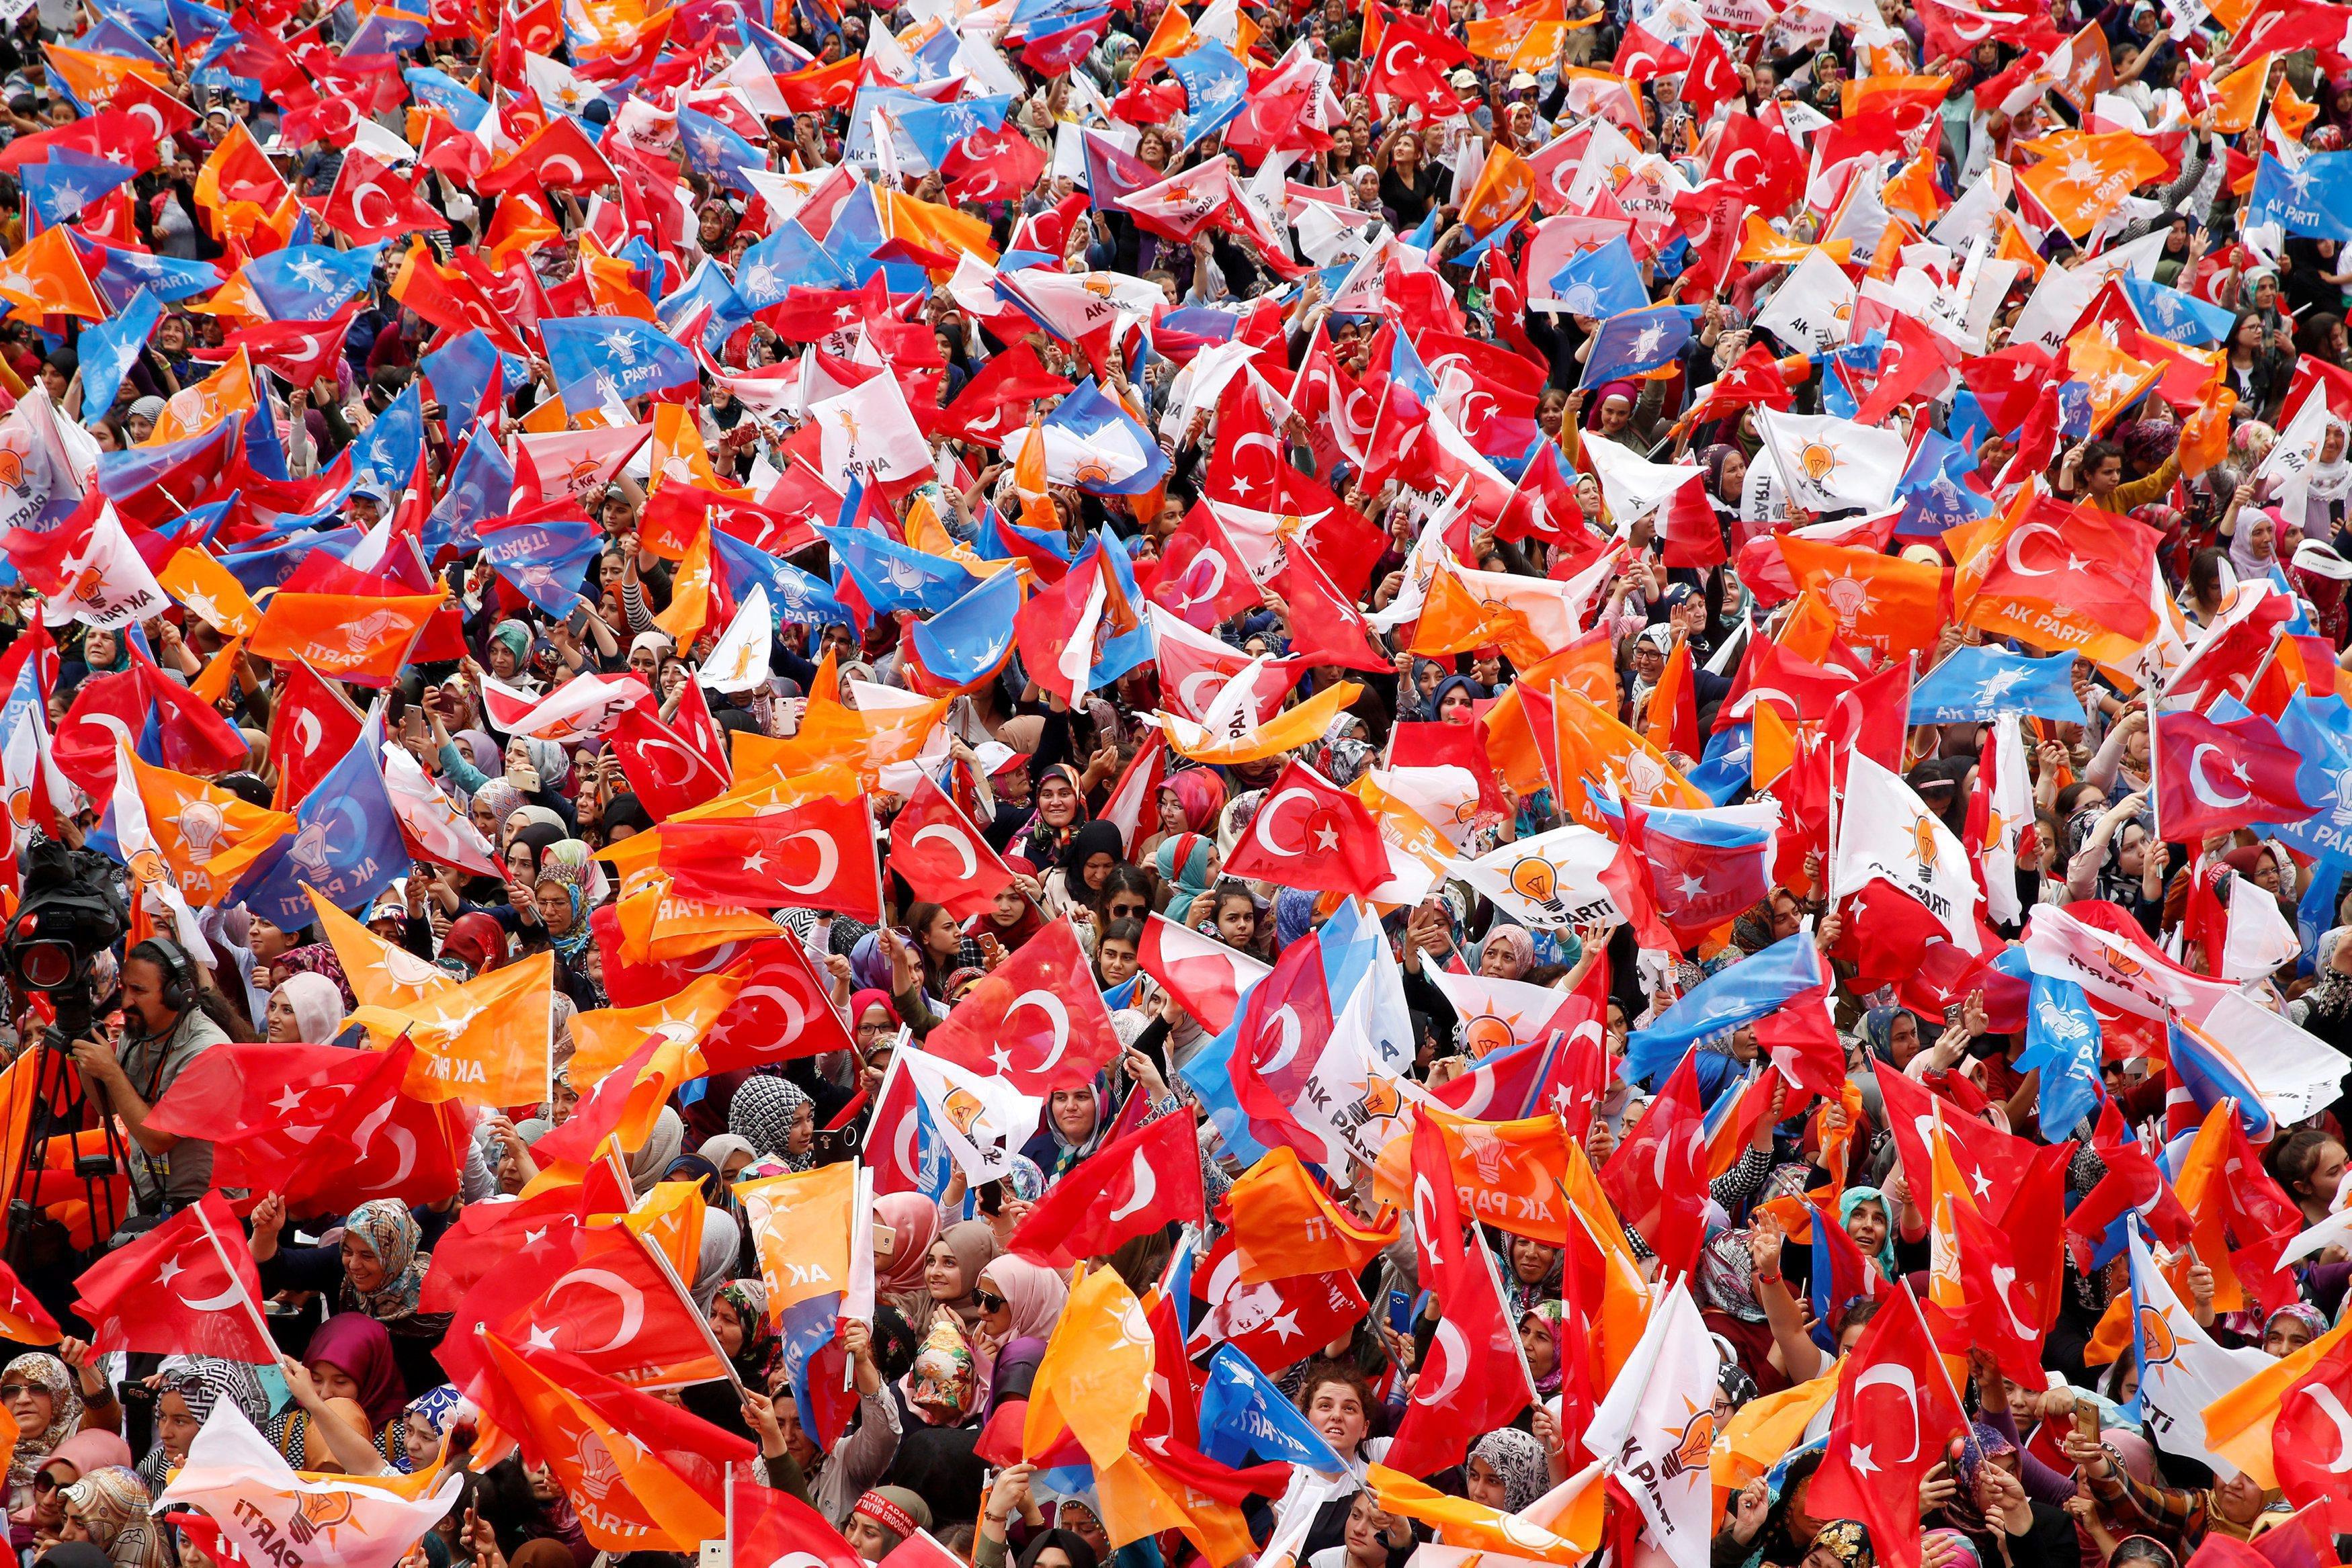 Supporters of Turkish President Erdogan wave Turkish and AK Party flags during an election rally in 